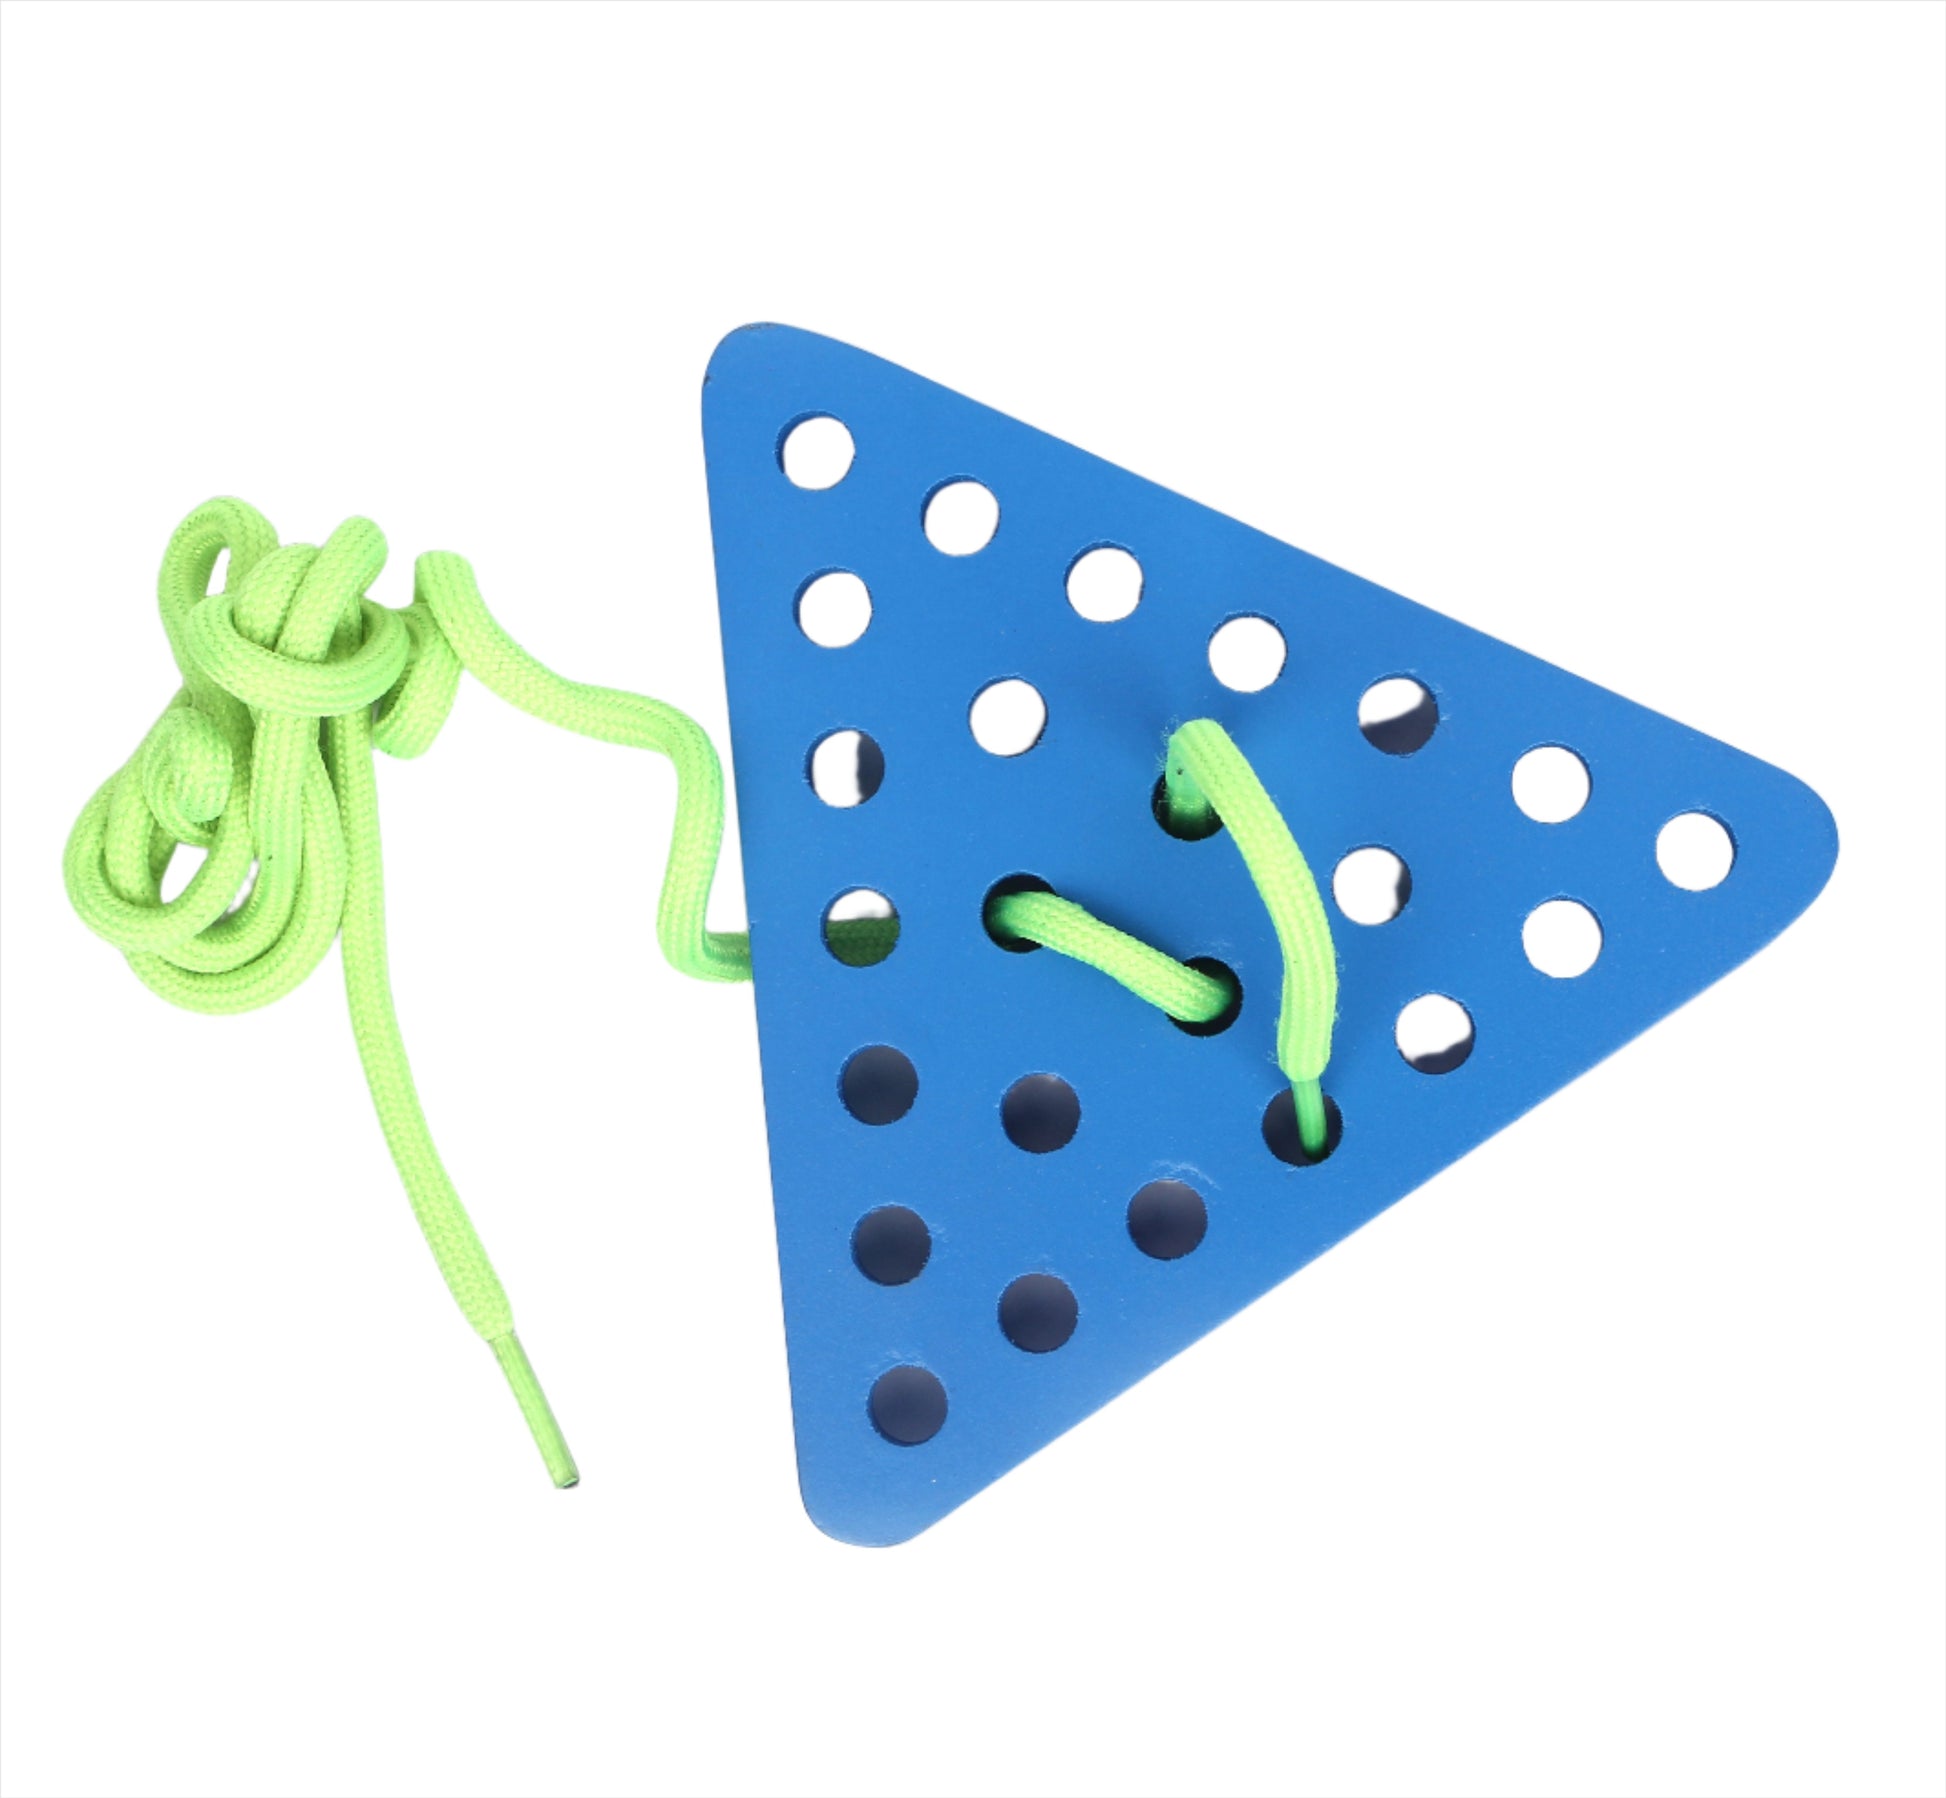 Blue Triangle shaped wooden weaving board  toy with green rope